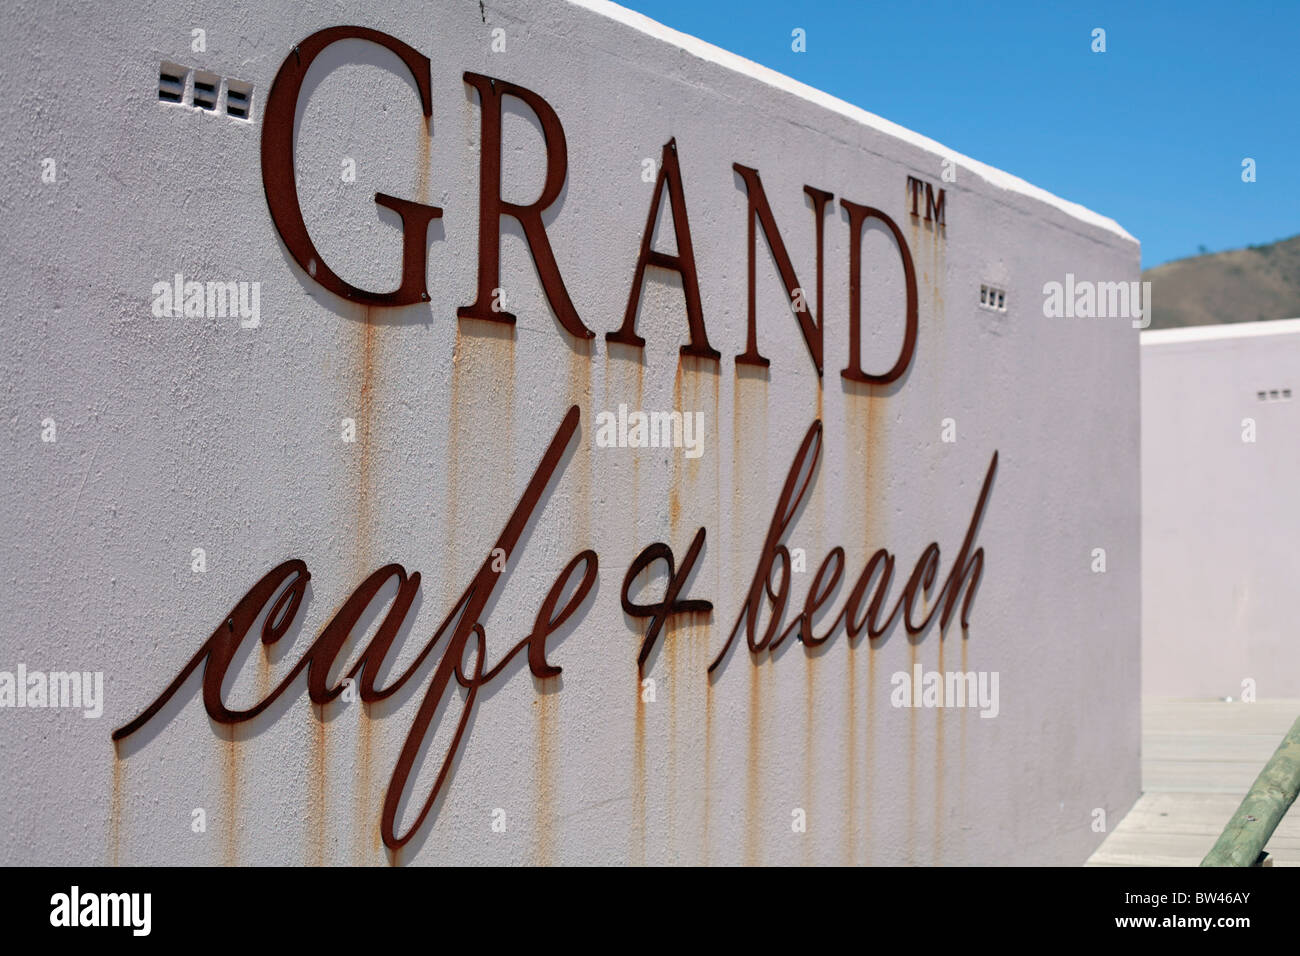 The Grand cafe and restaurant, Granger Bay, Cape Town, South Africa. Stock Photo